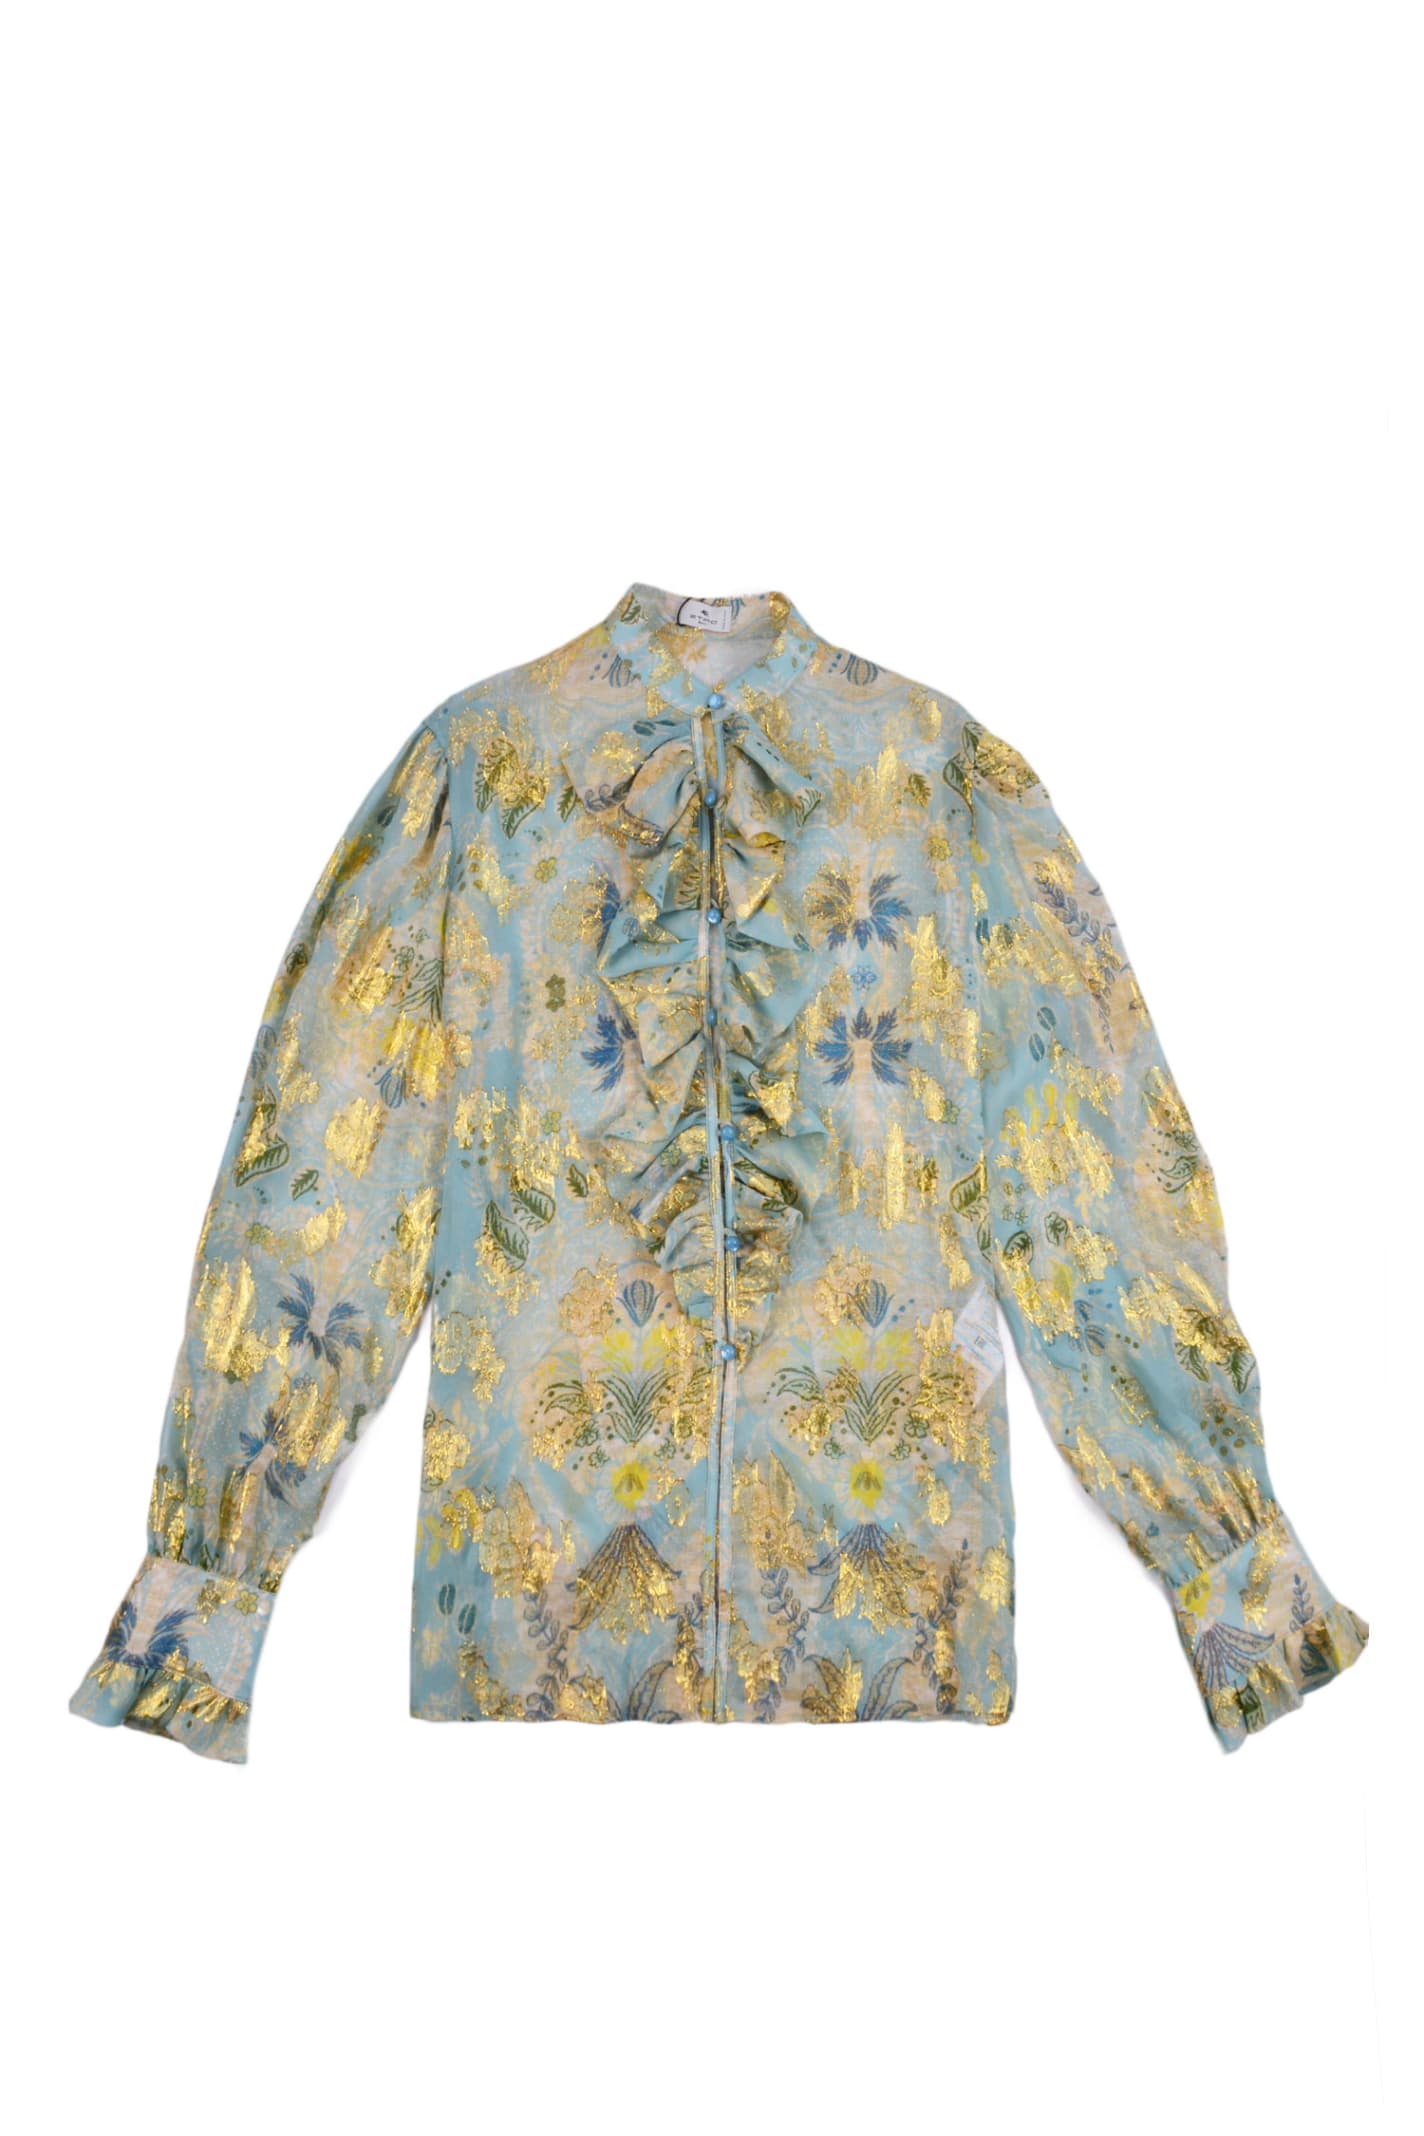 Etro Floral Shirt With Ruches